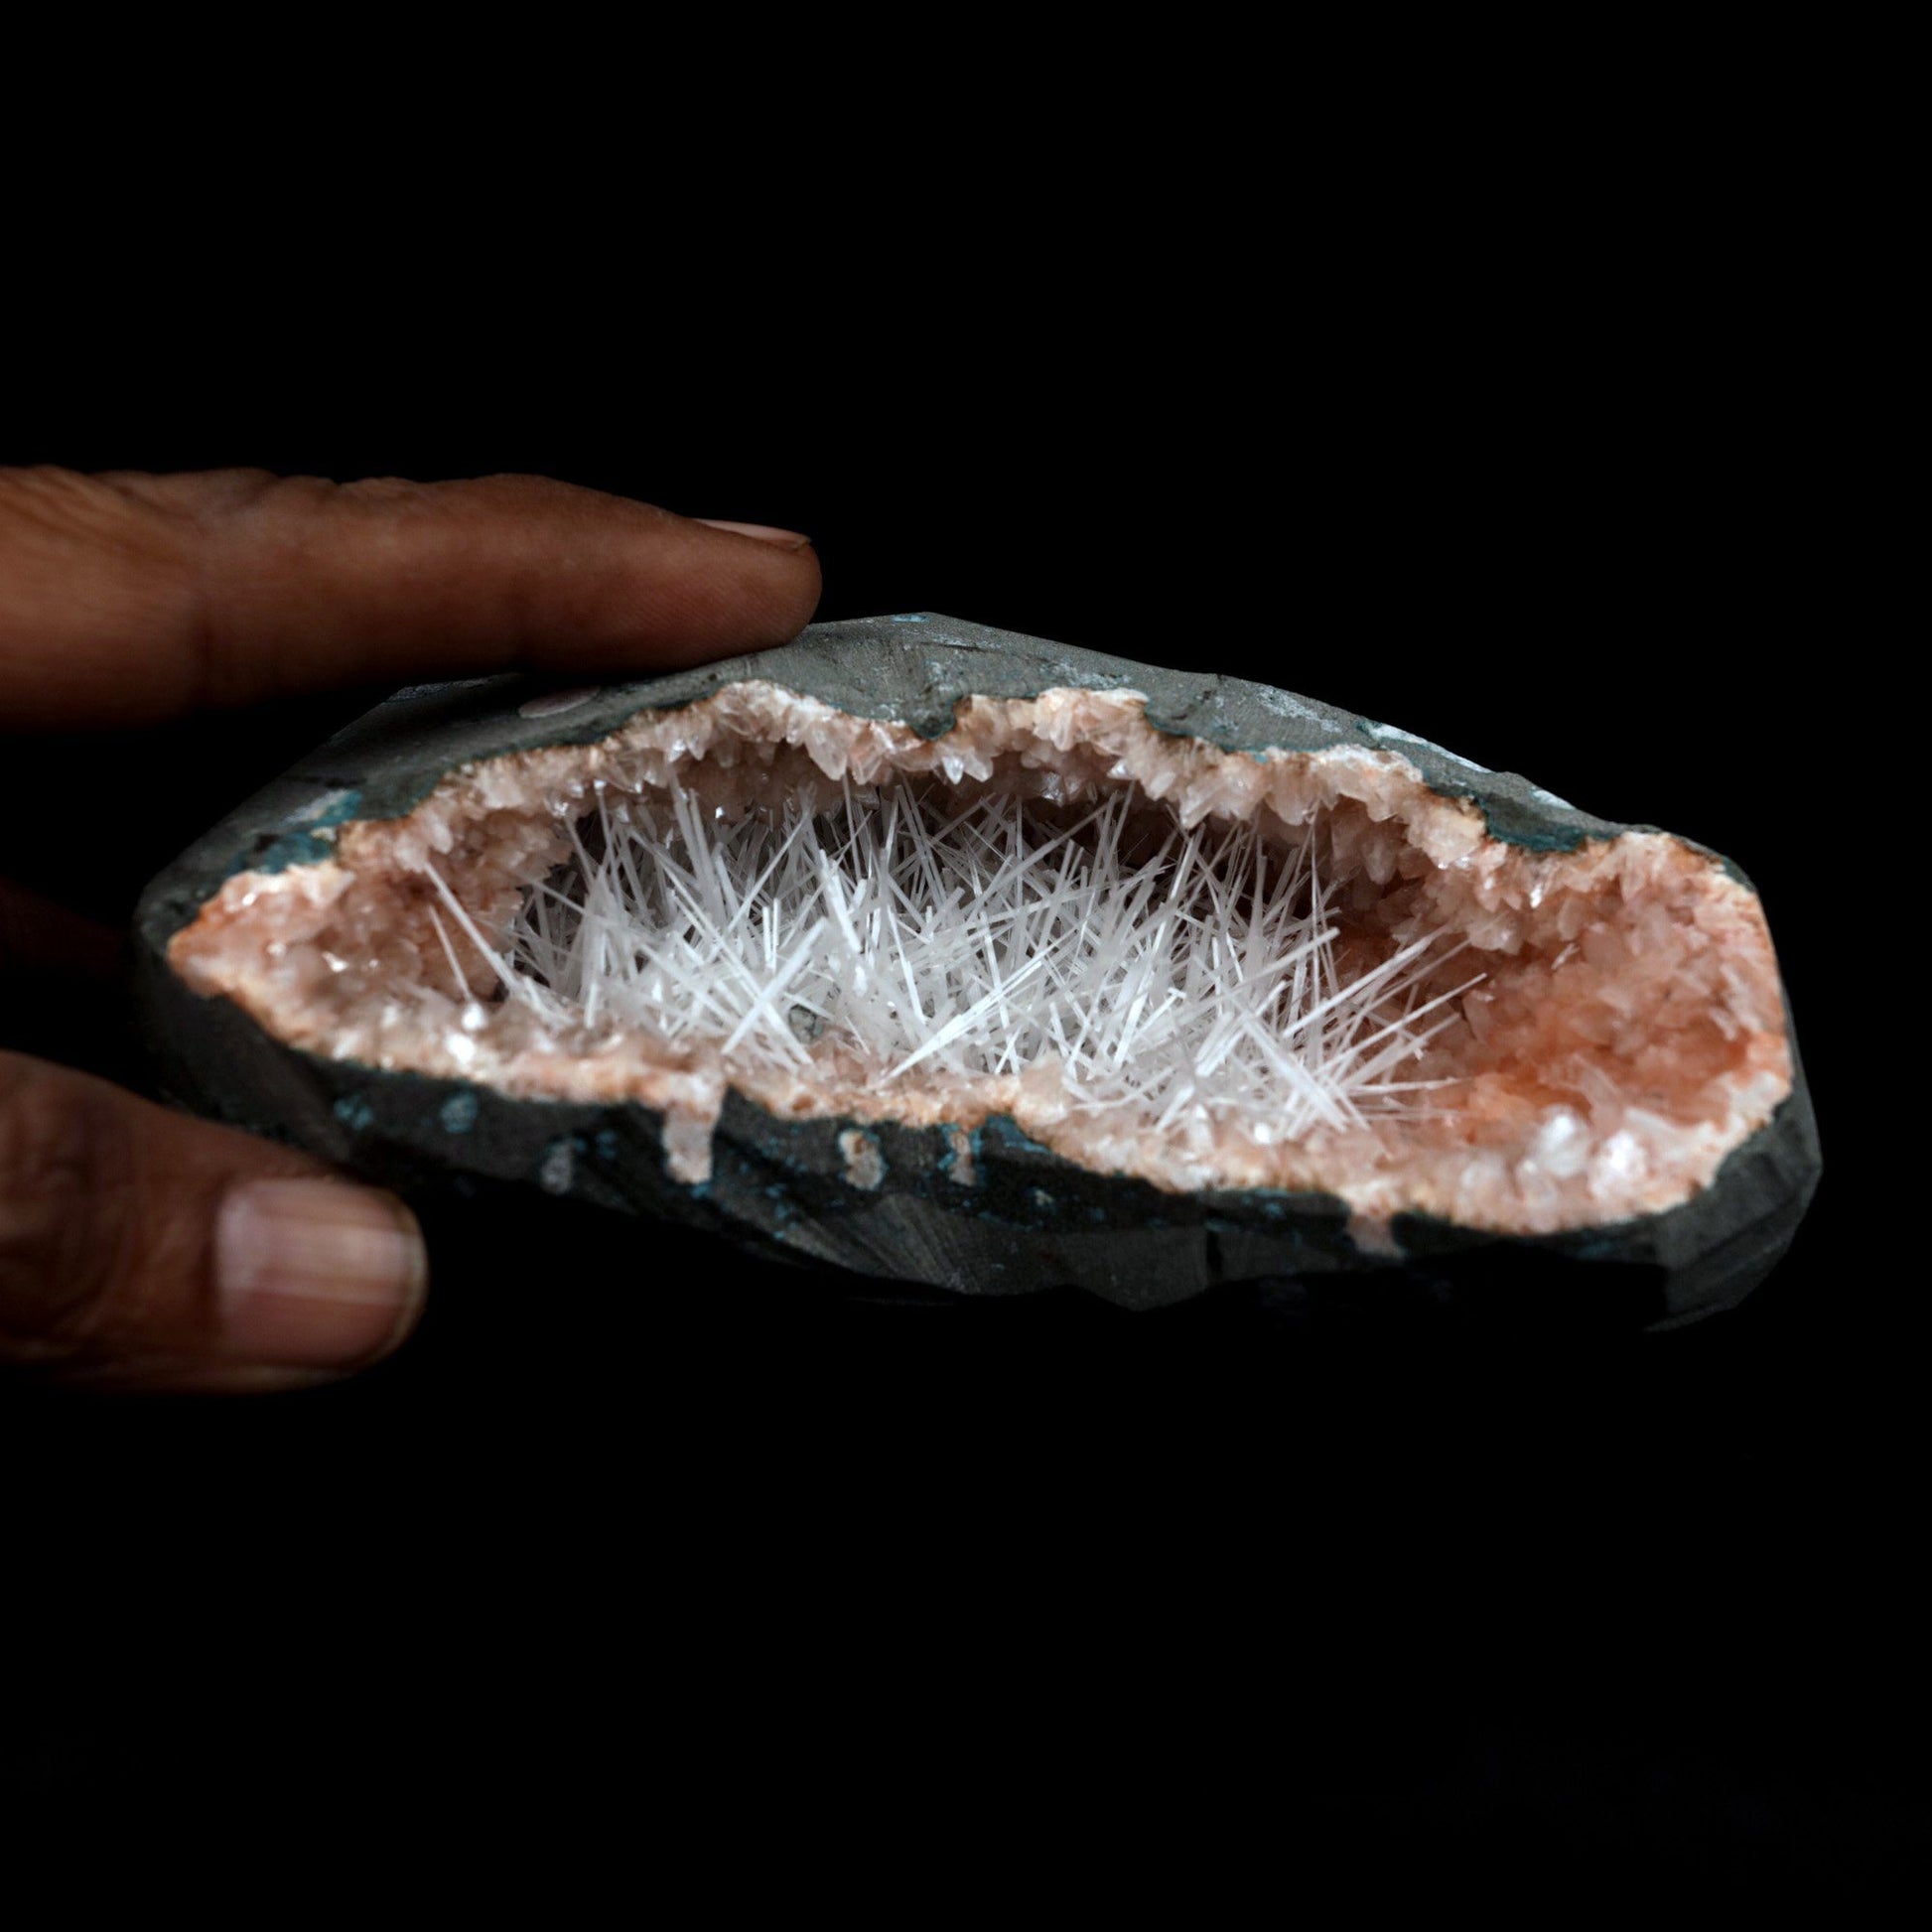 Scolecite Accular Sprays Inside Heulandite Geode Natural Mineral Speci…  https://www.superbminerals.us/products/scolecite-accular-sprays-inside-heulandite-geode-natural-mineral-specimen-b-4901  Features: Decorative geode encircled with beige, glossy Heulandite crystals, this piece has a pleasing aesthetic appearance. The crystals have a well-defined sheen that is pearly, almost glassy in appearance. This item has a lot of glimmer to it. The condition is excellent. Primary Mineral(s): Scolecite